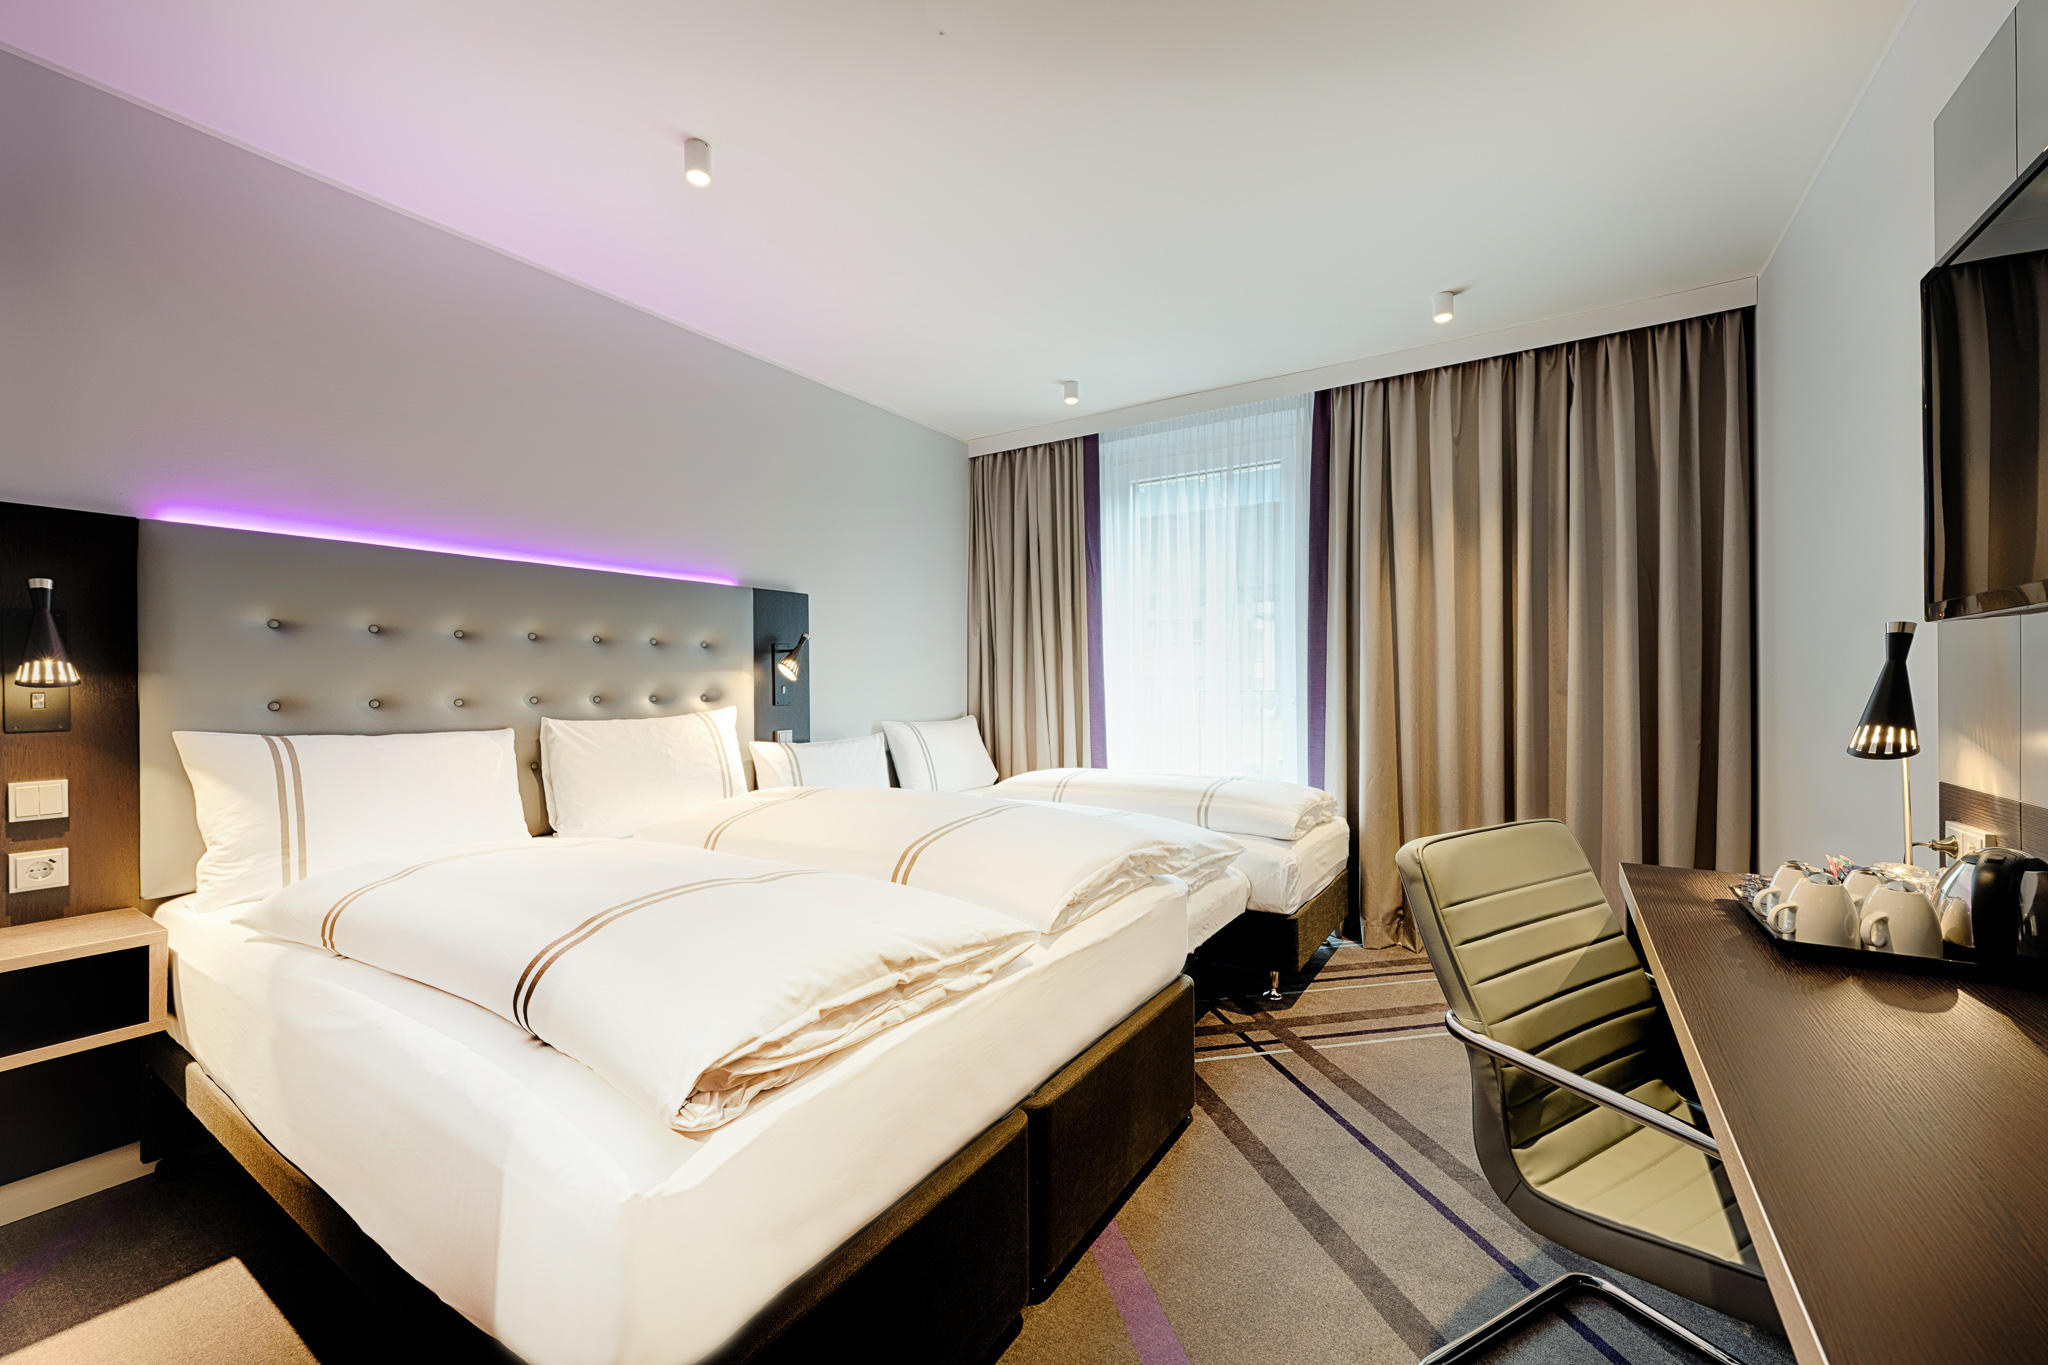 Premier Inn Hamburg City Klostertor hotel family room with double bed and two singles beds